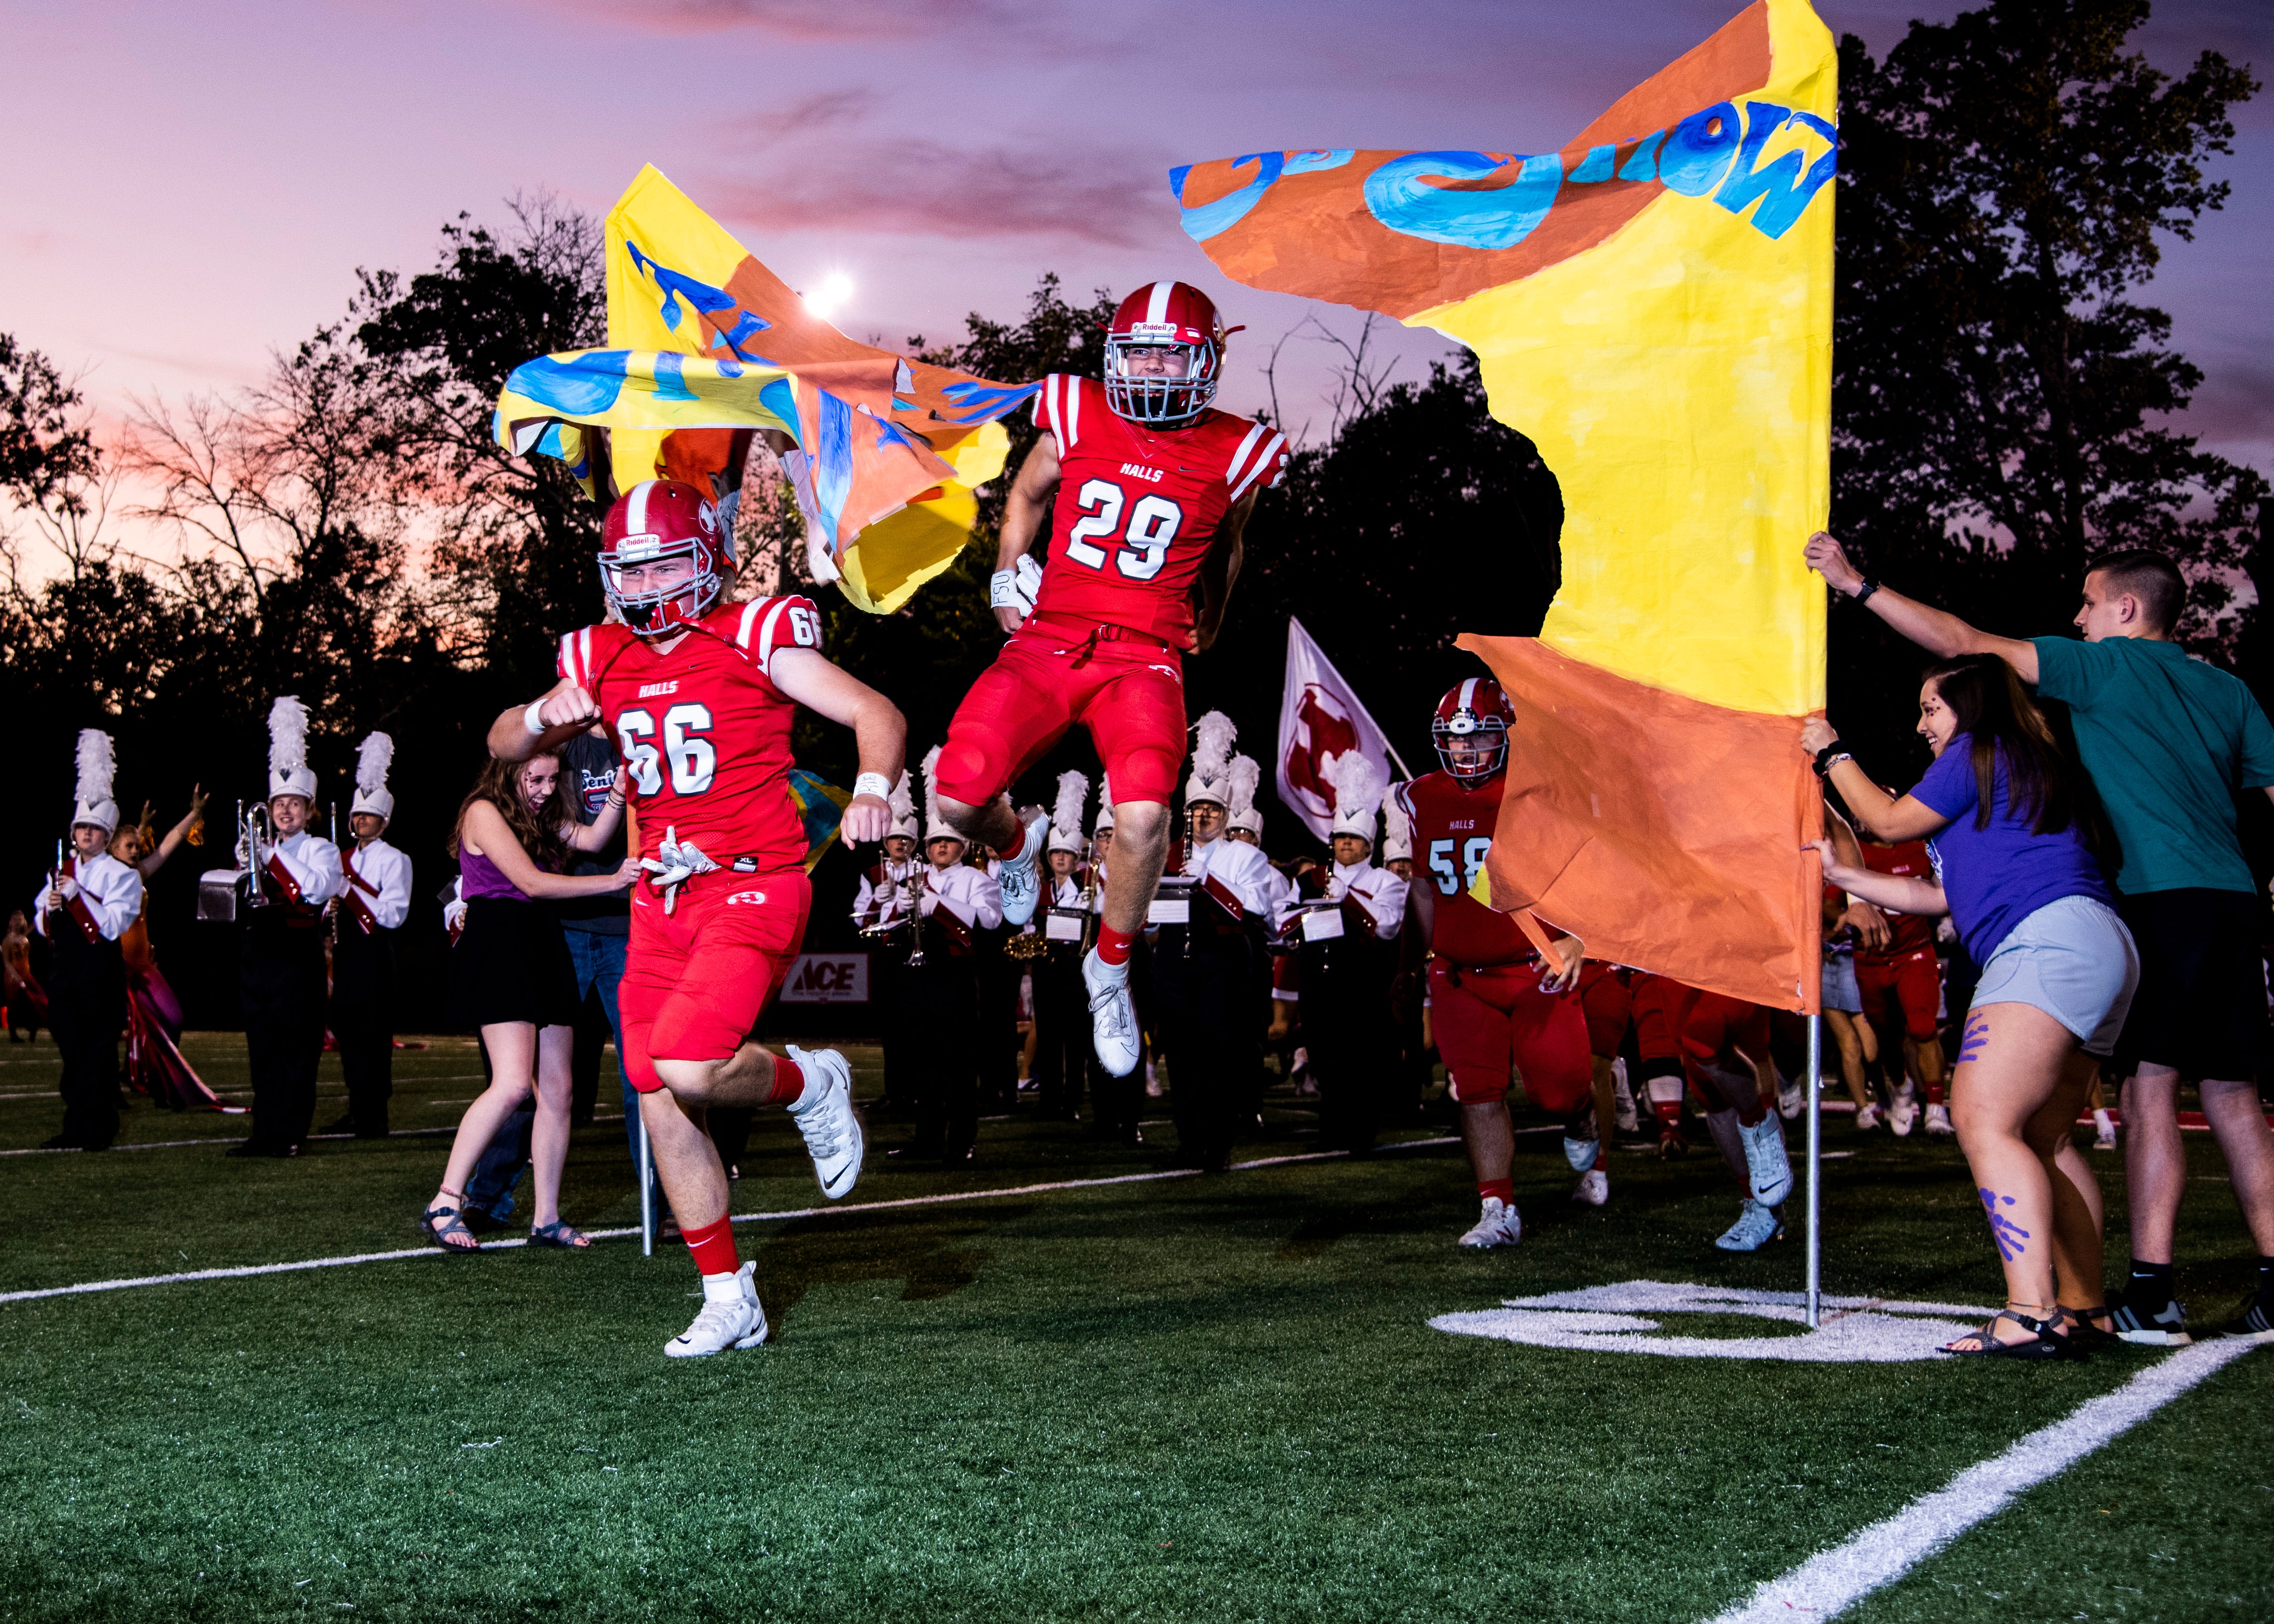 Halls' Jacob Williams (66) and Parker Breeden (29) jump through a spirit banner before the Halls and Central high school football game on Friday, October 4, 2019 at Halls High School.